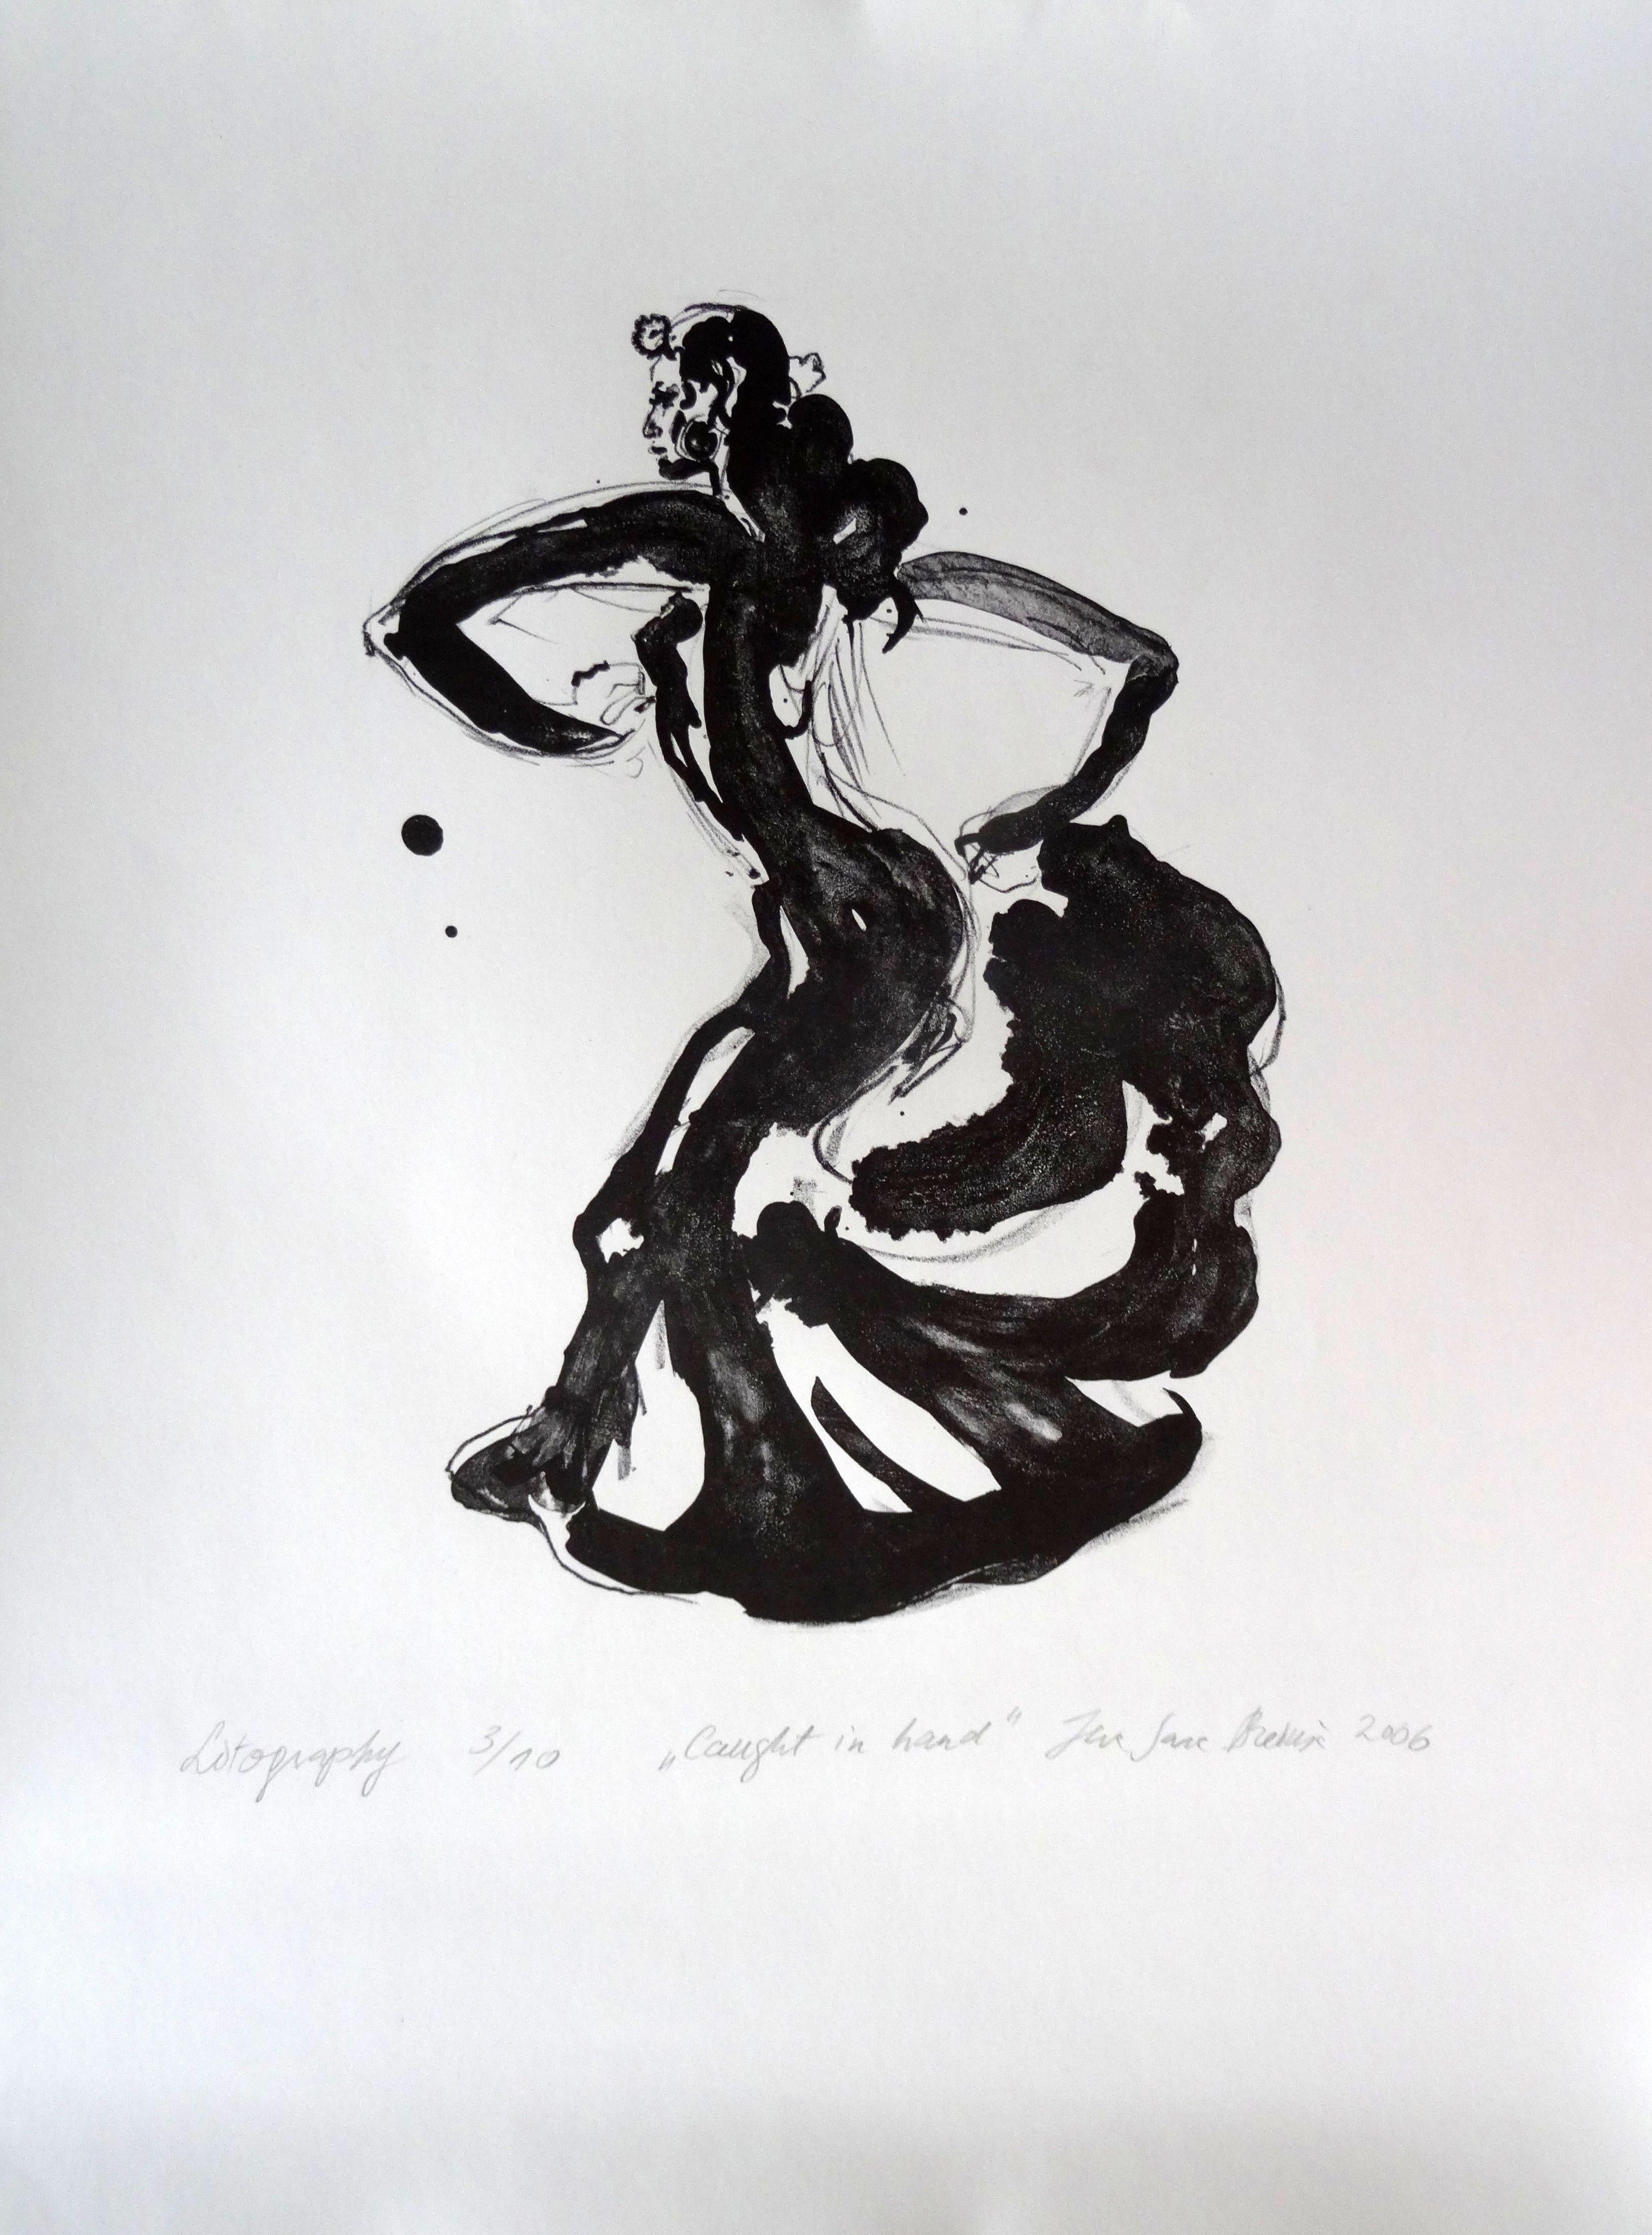 Caught in hand. Dancer. 2006. Paper, lithography, 72x54.5 cm